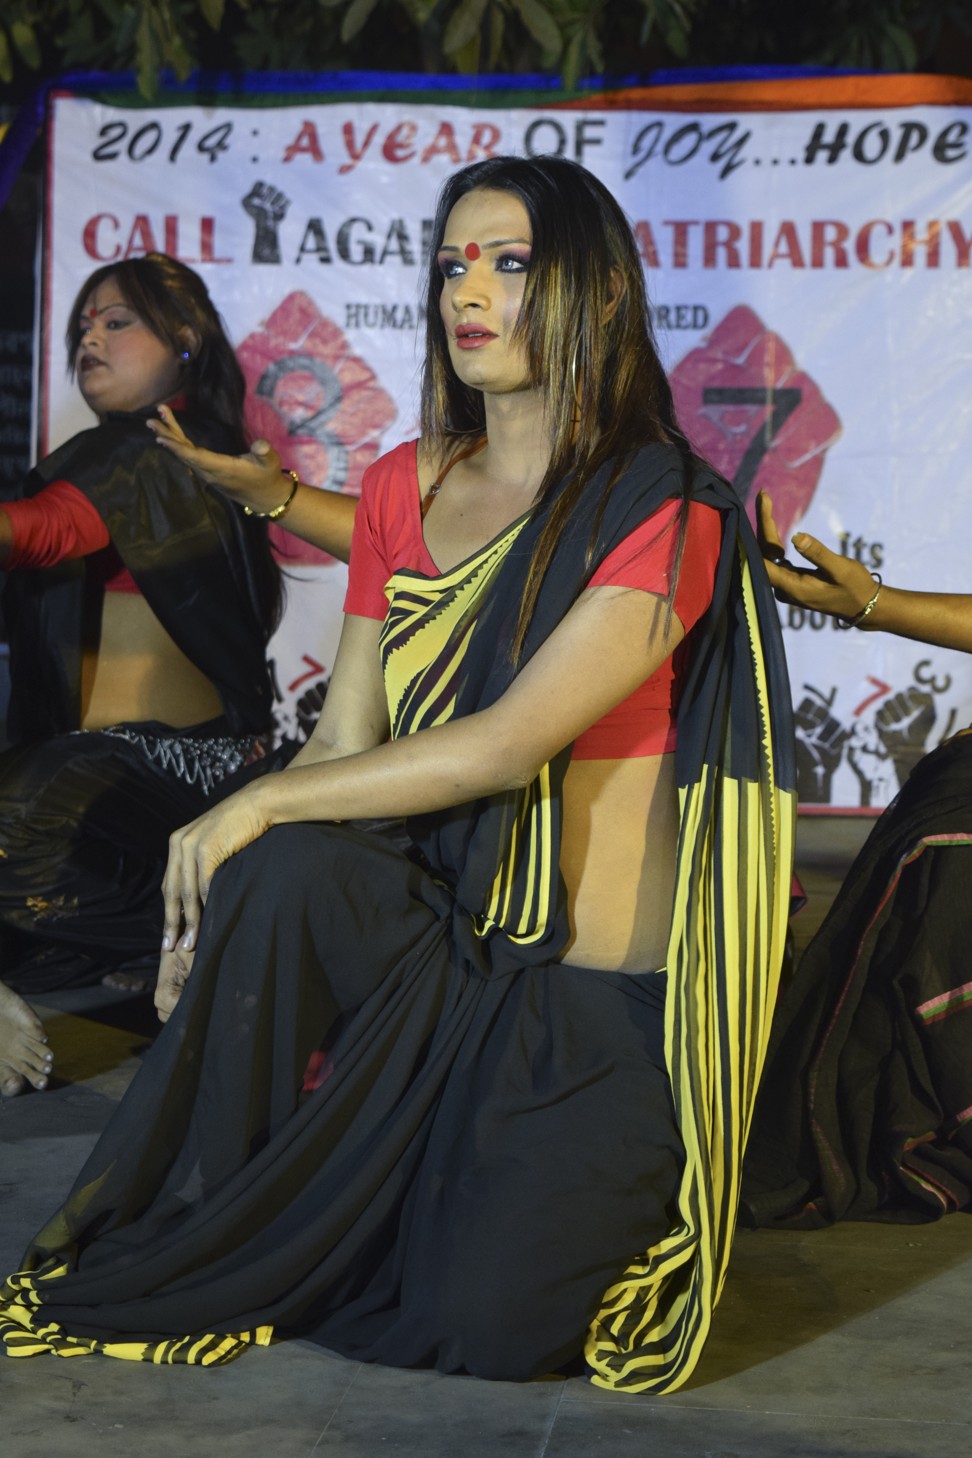 Transgender people take part in Call Against Patriarchy, a 2014 event held by the Civilian Welfare Foundation (CWF). Photo: Civilian Welfare Foundation